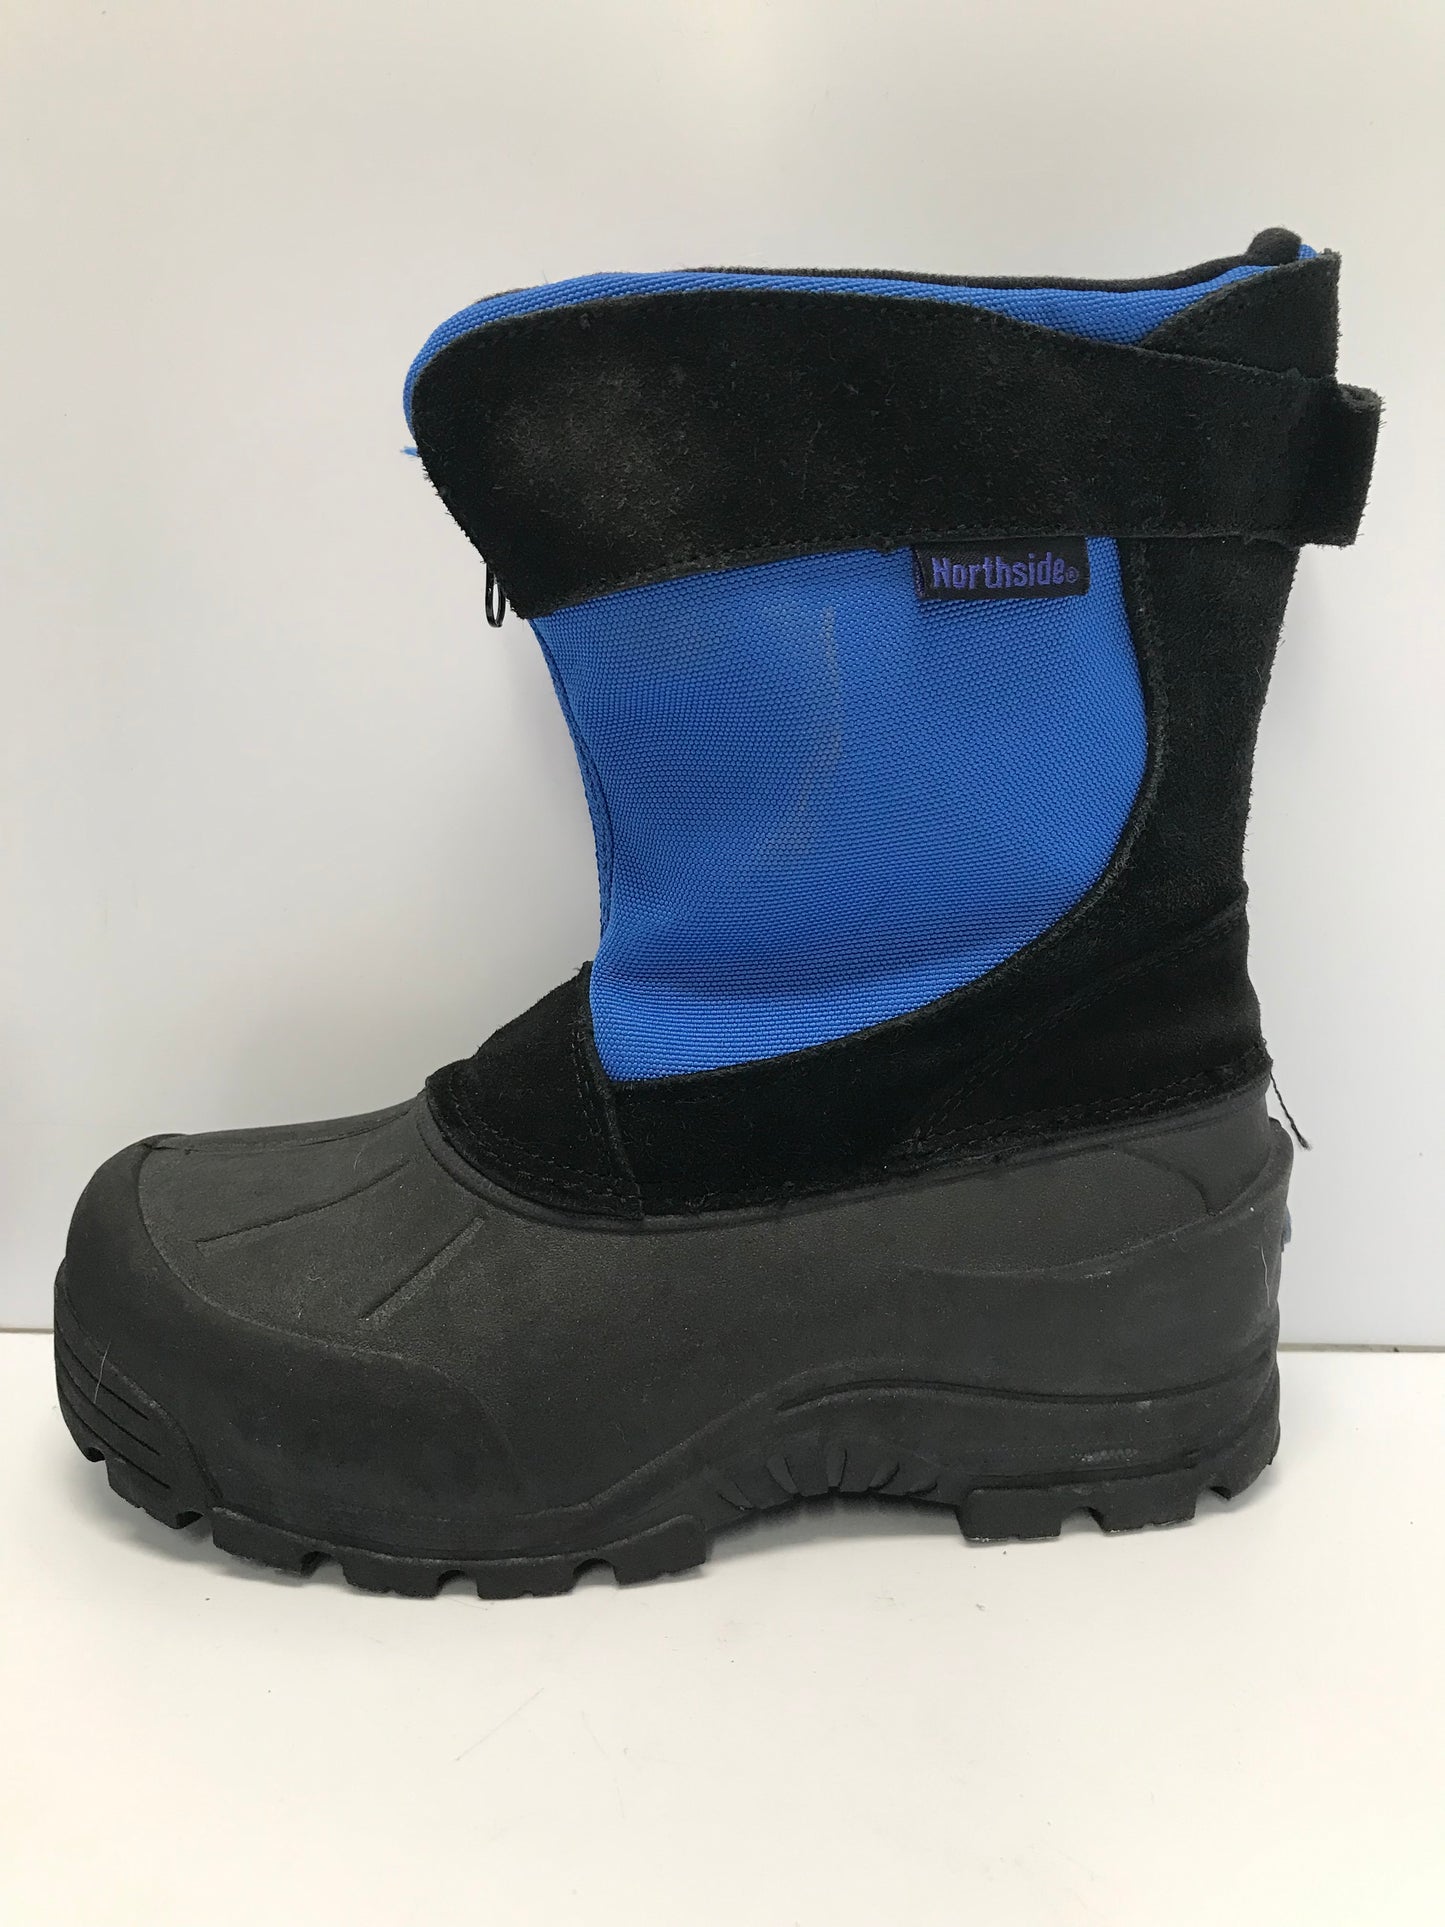 Winter Boots Child Size 4 Canadian Blue Black With Liner Like New